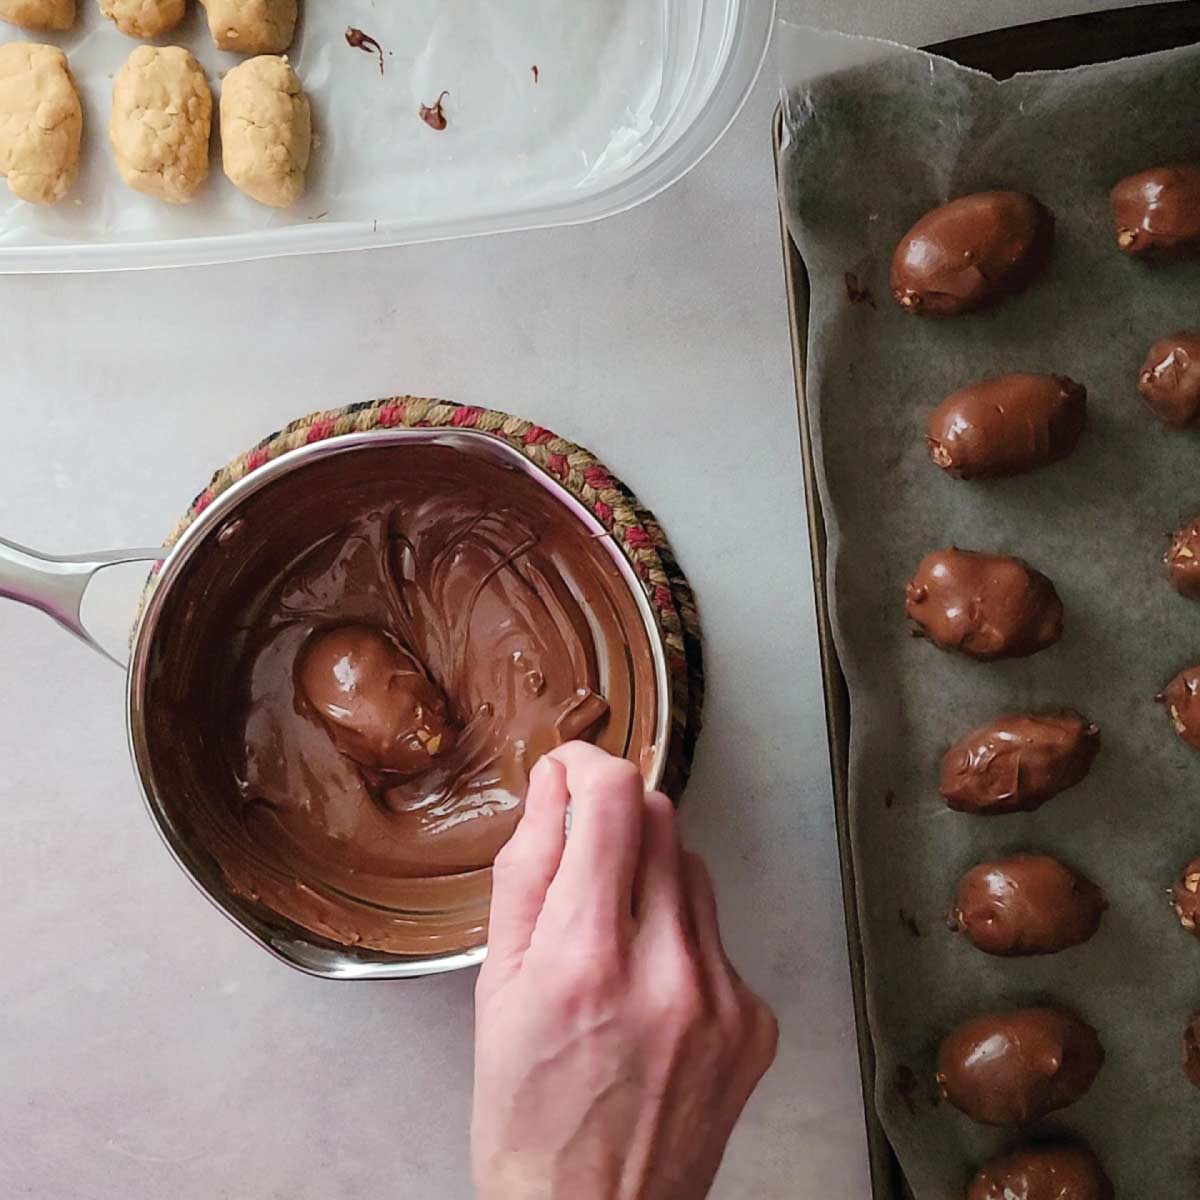 Egg in melted chocolate in a small sauce pot being coated in chocolate.